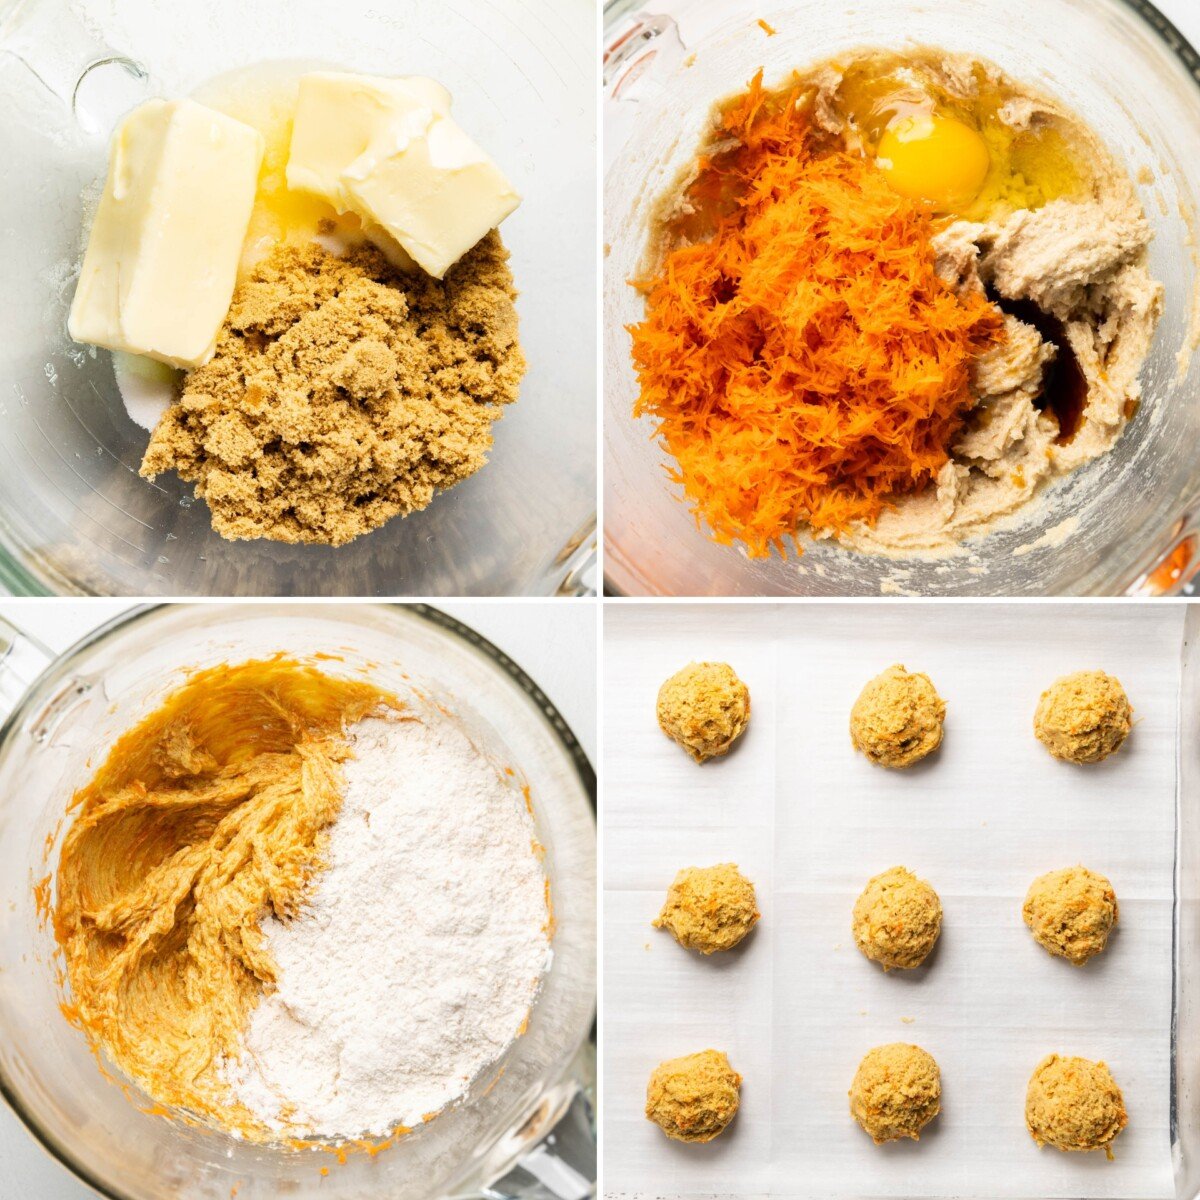 A collage of four images showing ingredients in a mixing bowl at various stages of being mixed together, and an image of cookie dough balls on a baking sheet.